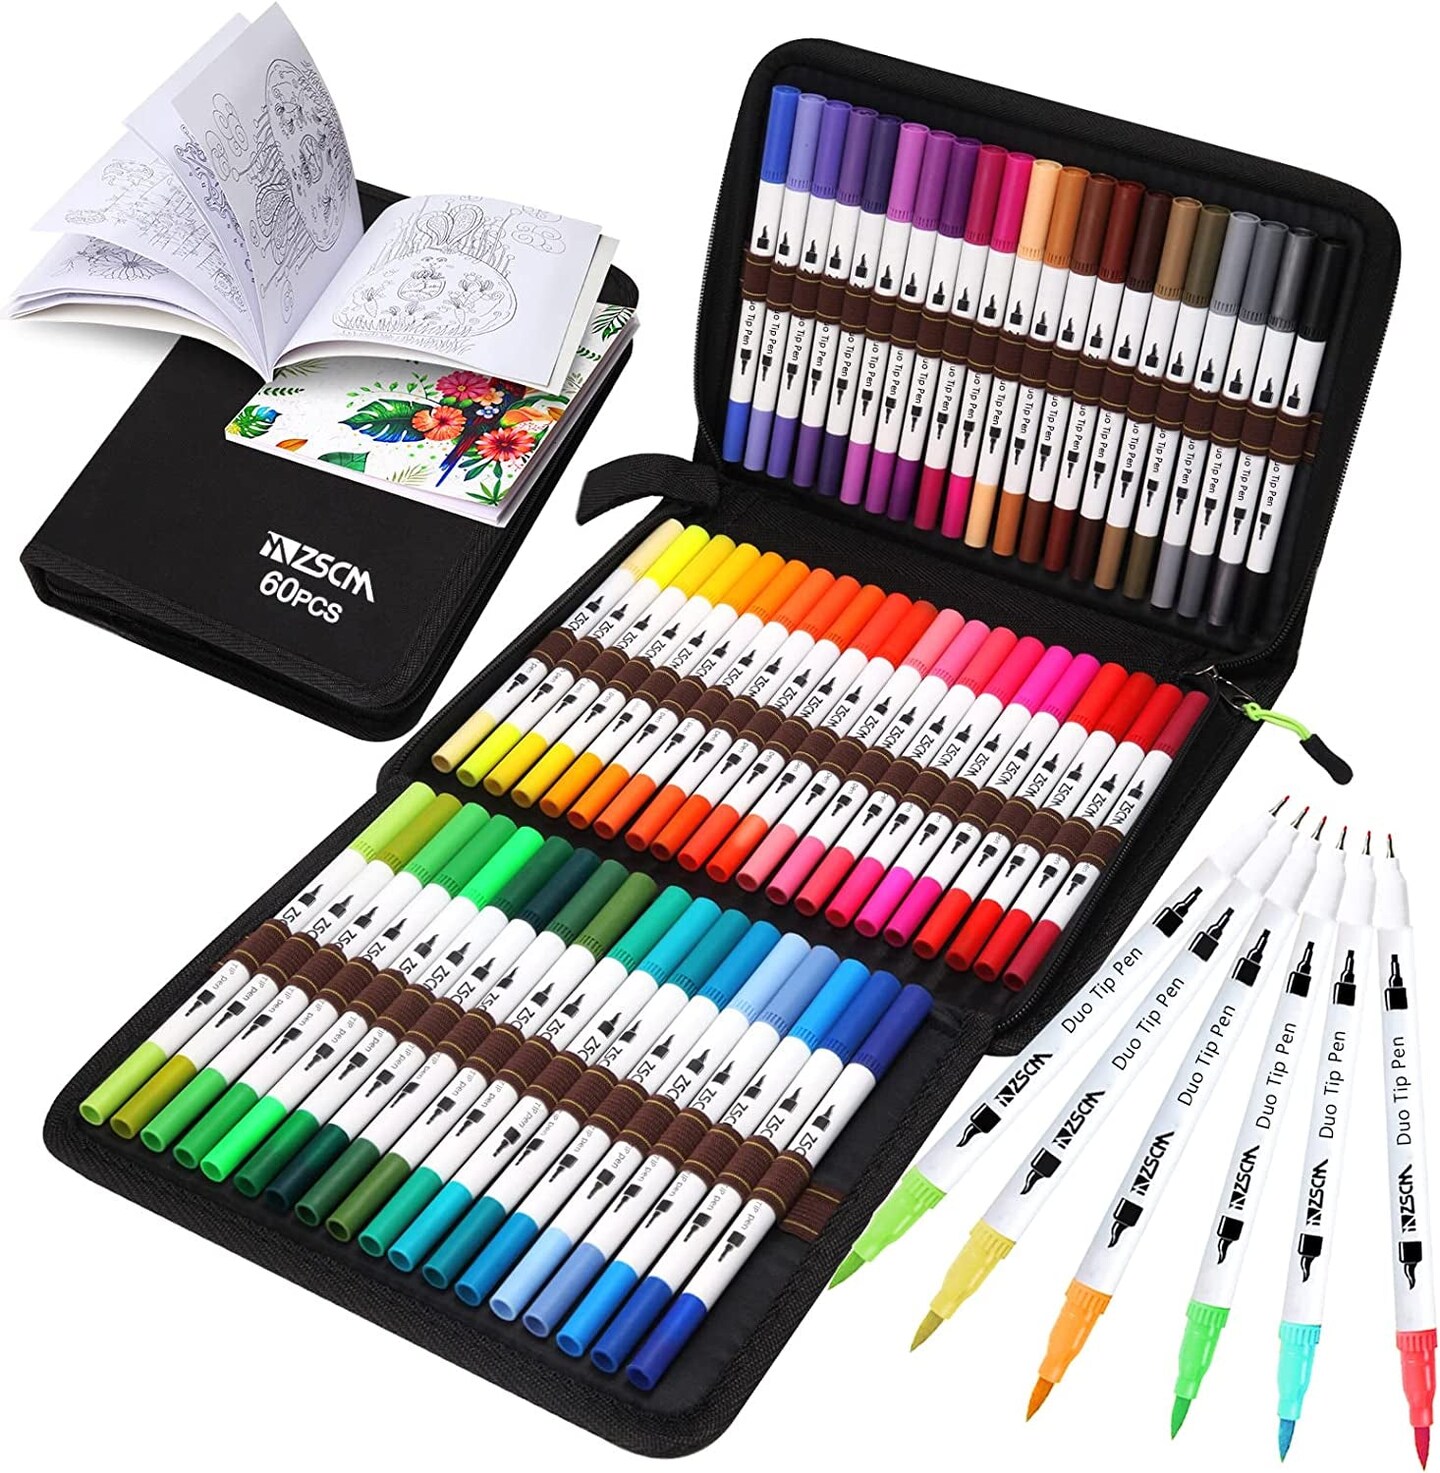 ZSCM Duo Tip Brush Coloring Pens,60 Colors Art Markers,Fine & Brush Tip Pen  for Adults Coloring Book Journals Planner Writing Drawing Note Taking